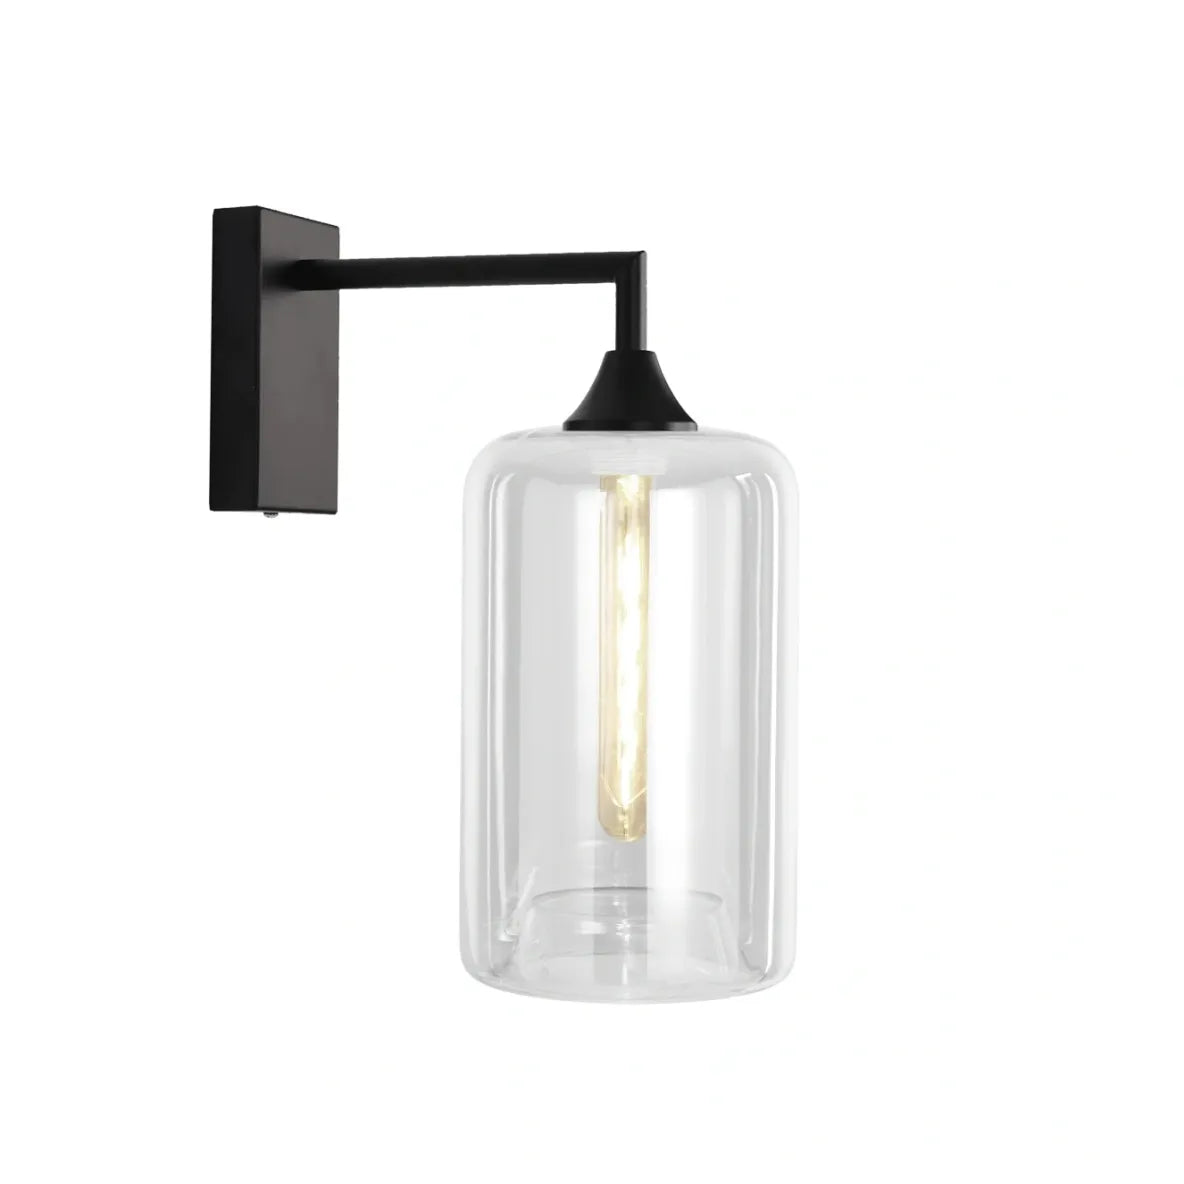 Murano Black Wall Light with Slim Cylinder glass